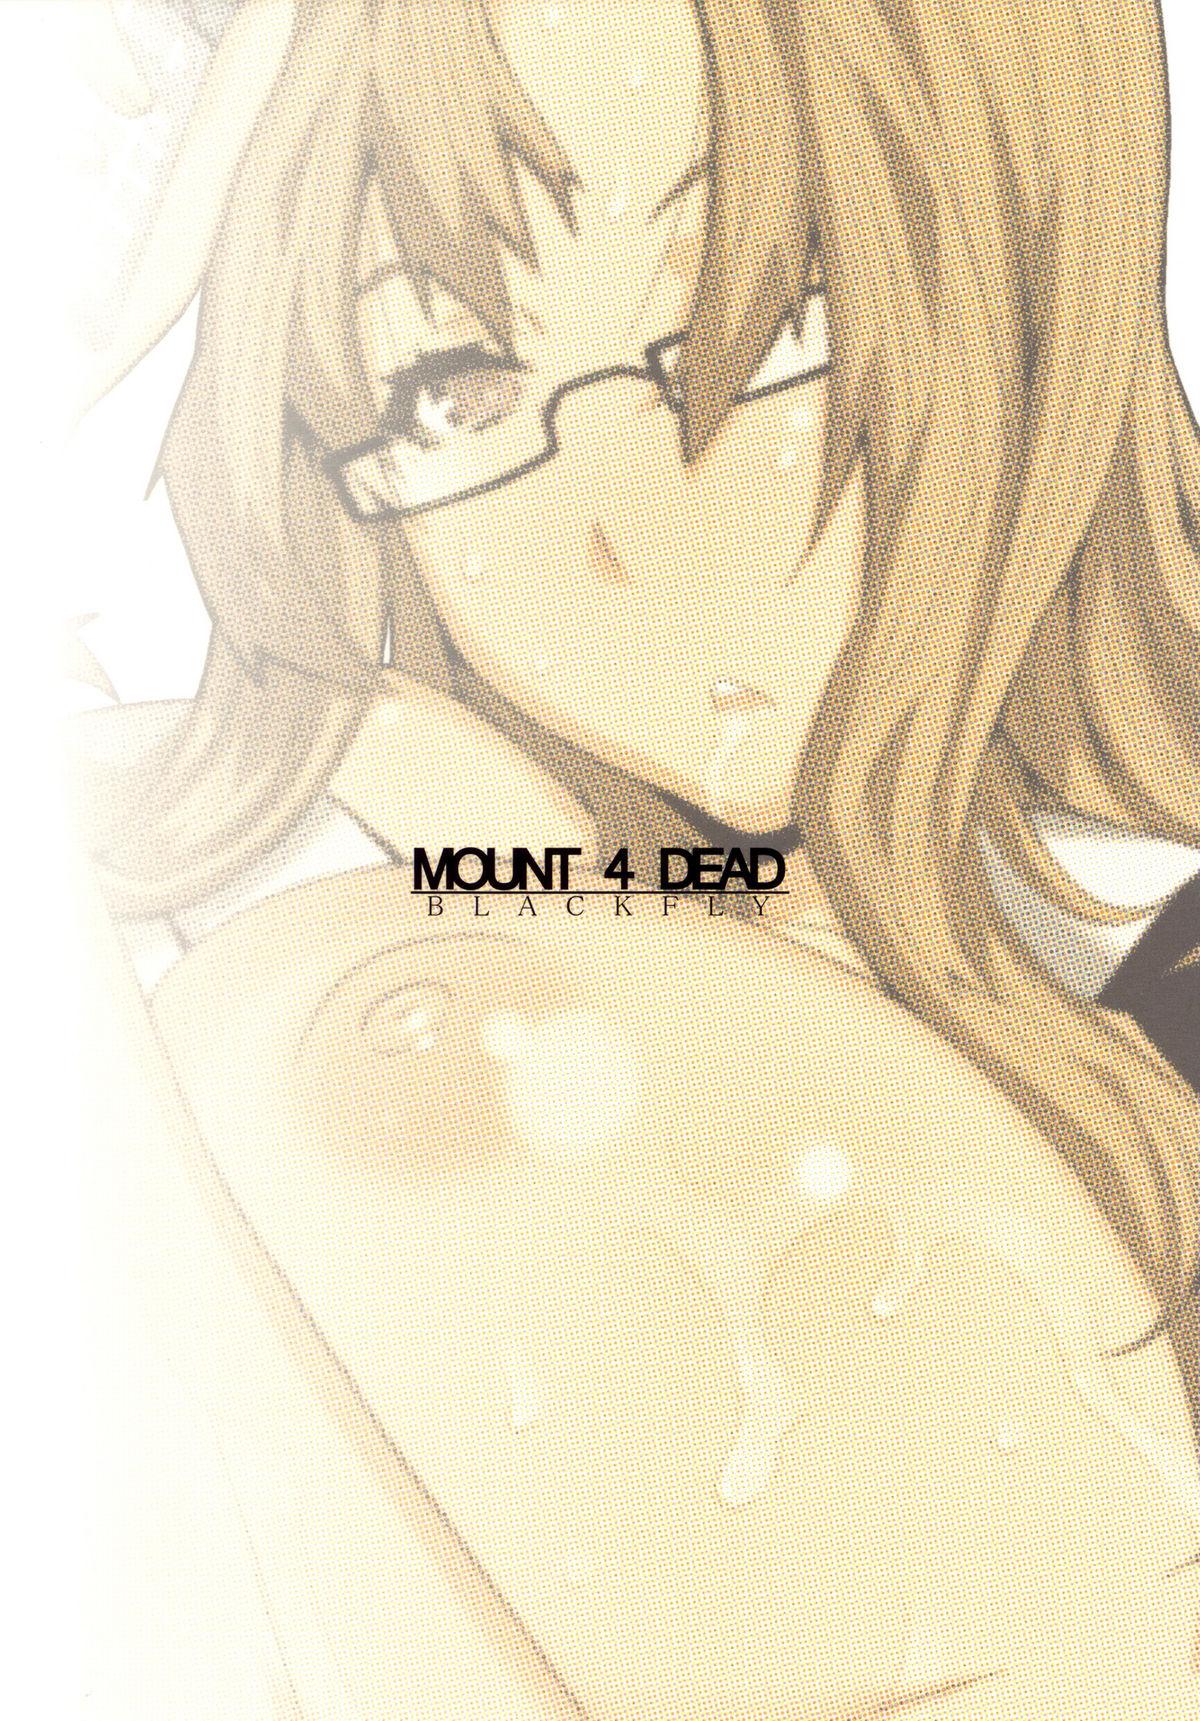 Bigbooty MOUNT 4 DEAD - Steinsgate 18 Porn - Page 27